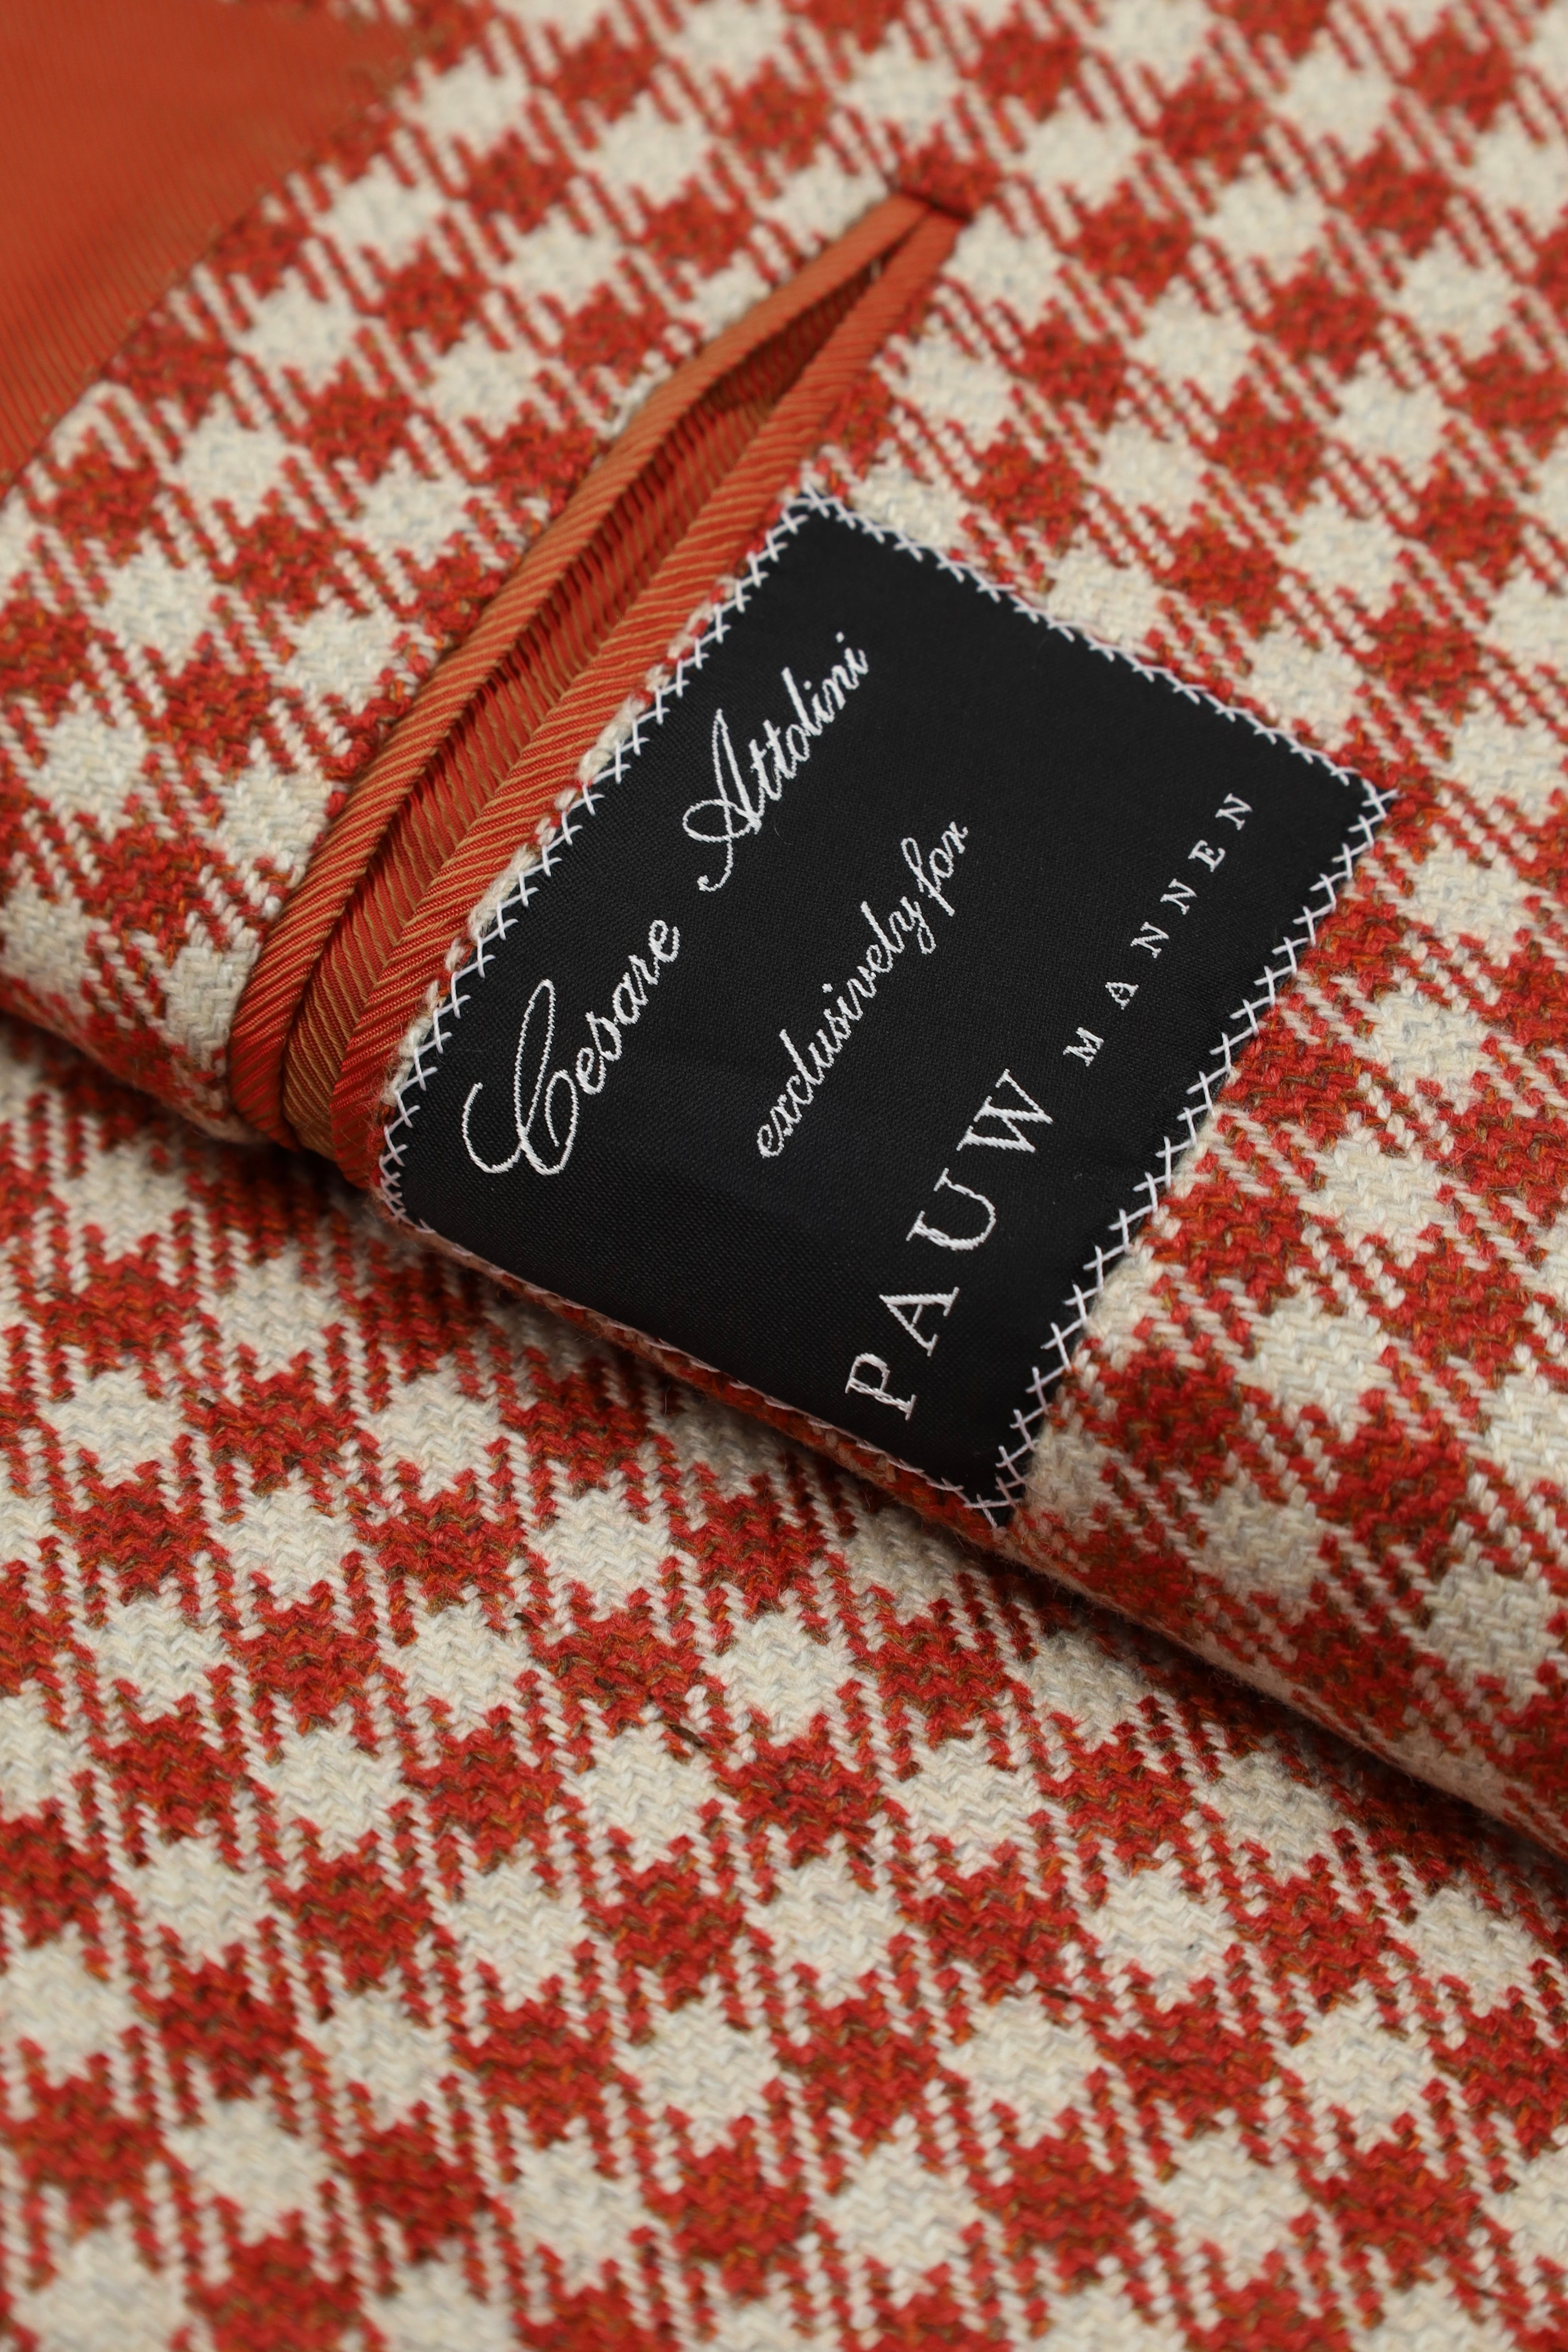 Cesare Attolini Red Gingham Check Cashmere Jacket